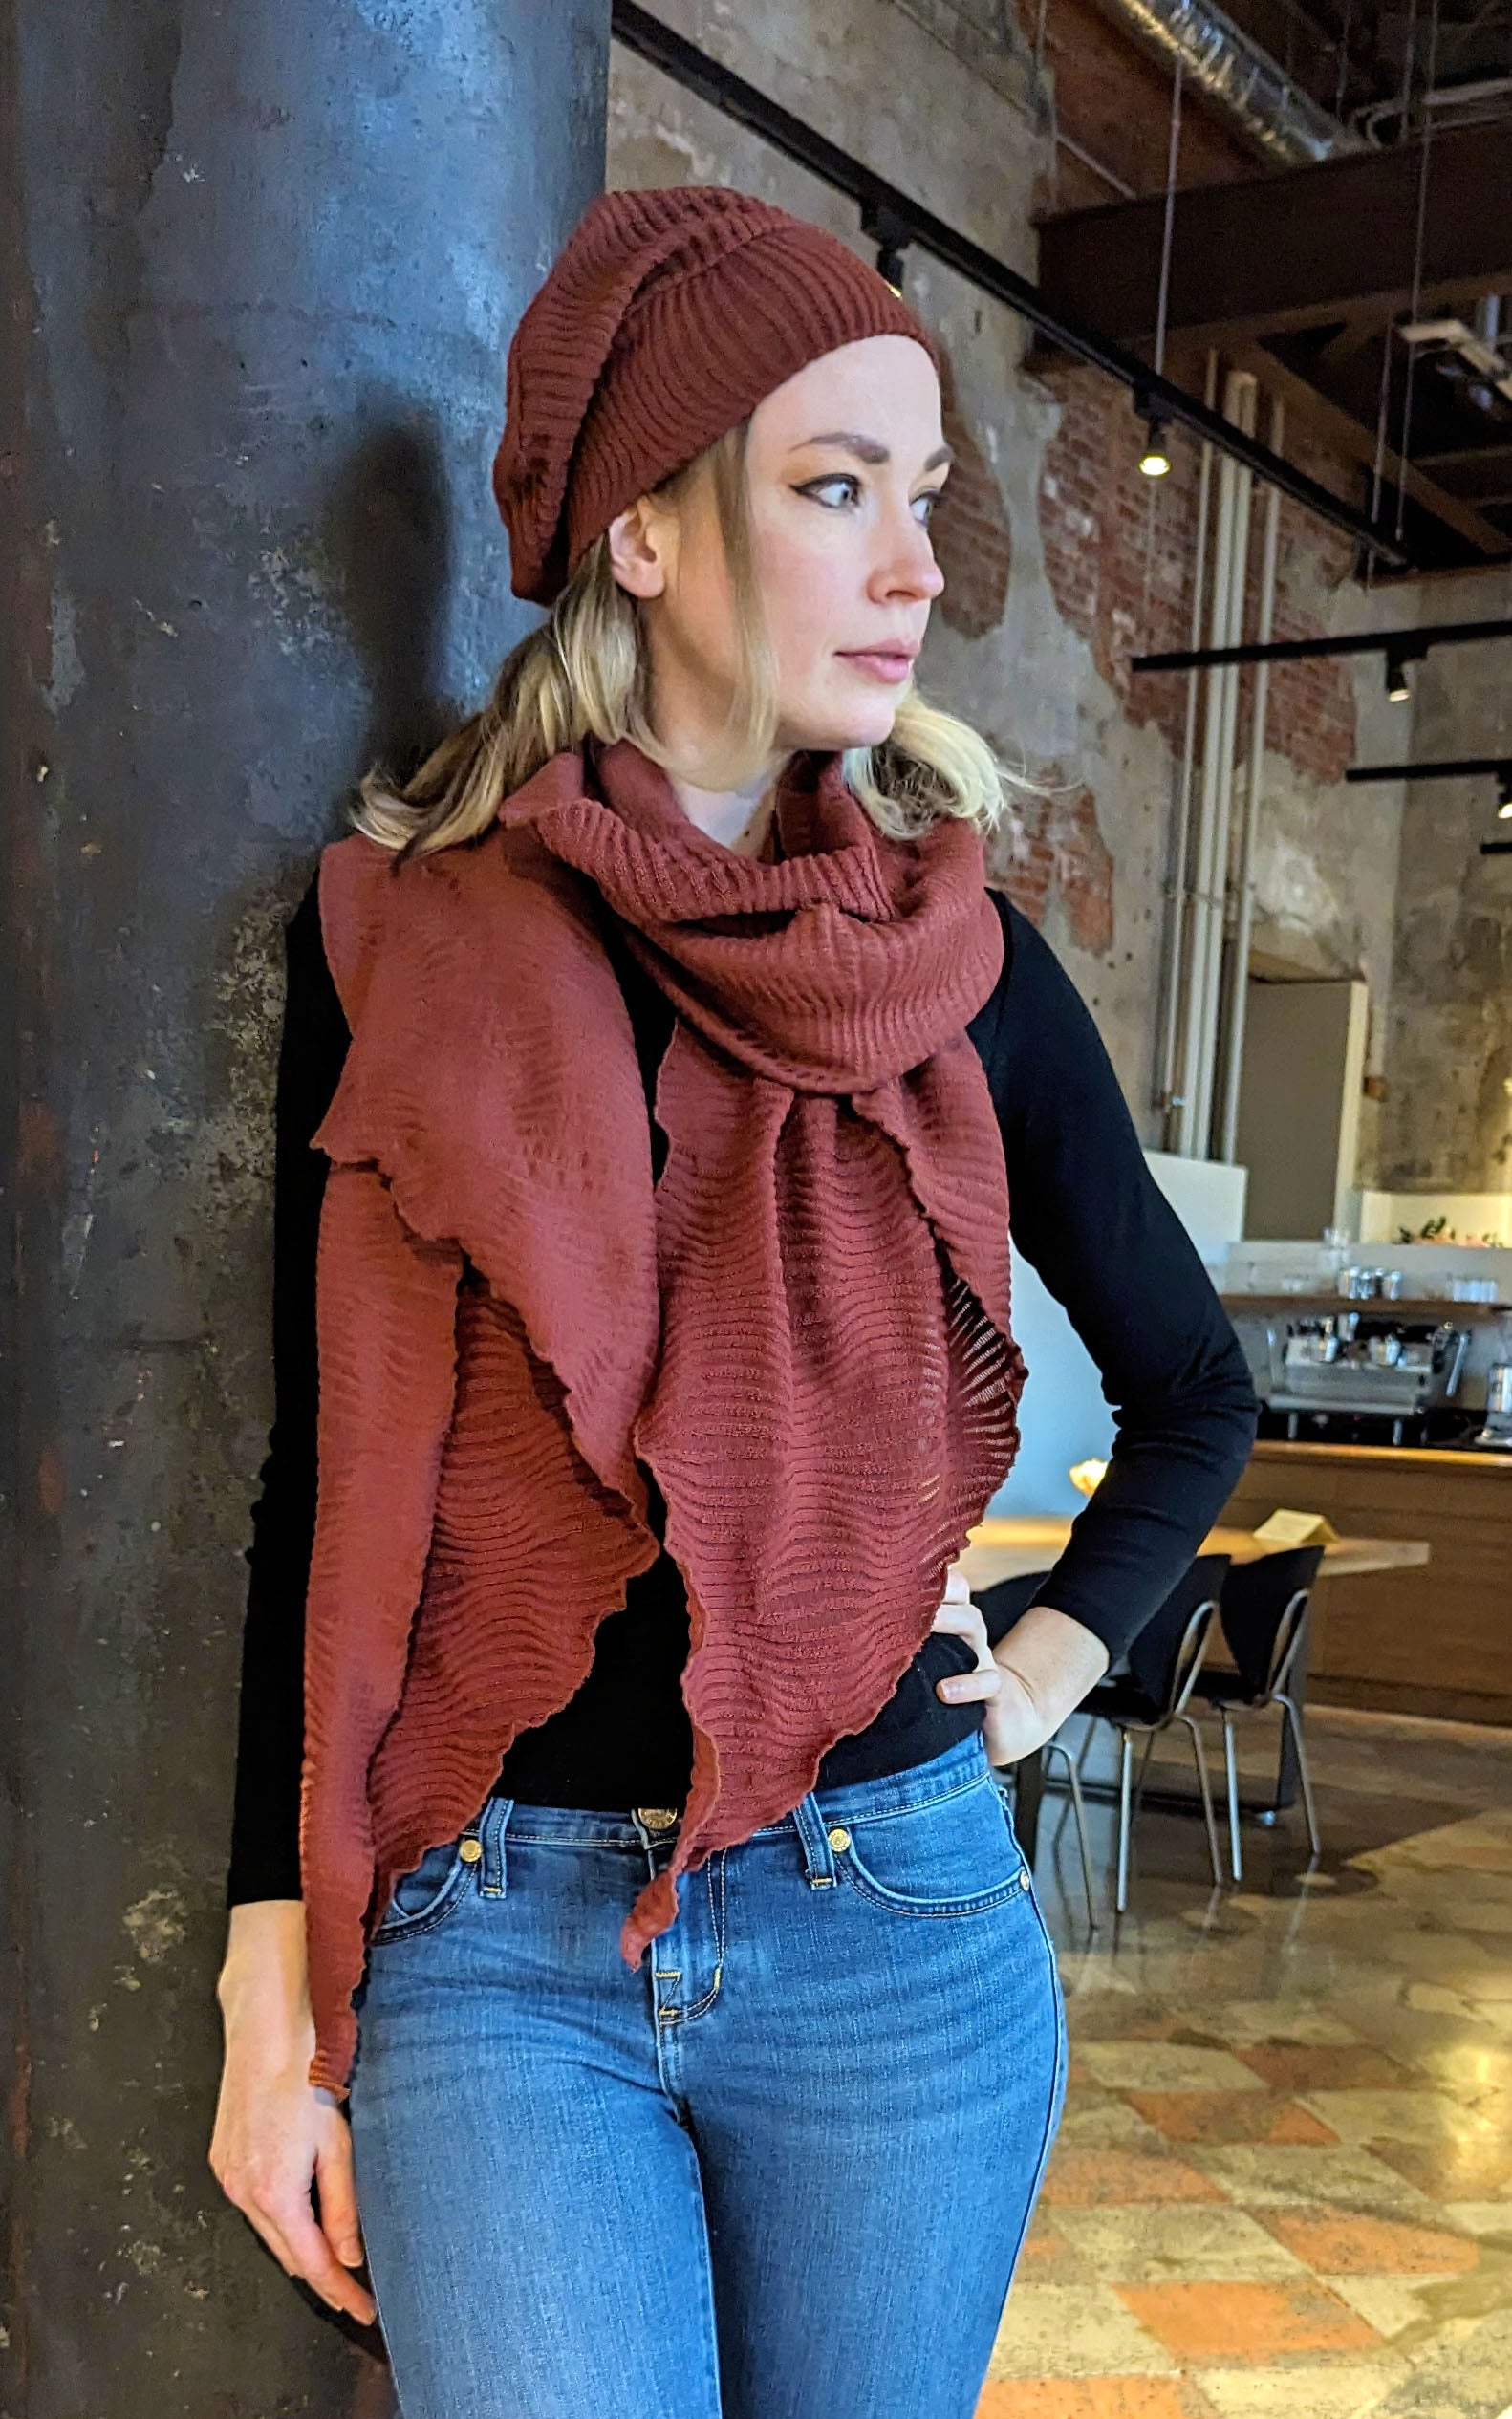 Model in Handkerchief Scarf and Rowdie in Fractal Burnt Sienna from the Pandemonium Seattle Fractal Collection. LYC by Pandemonium is handmade in Seattle, WA, USA.